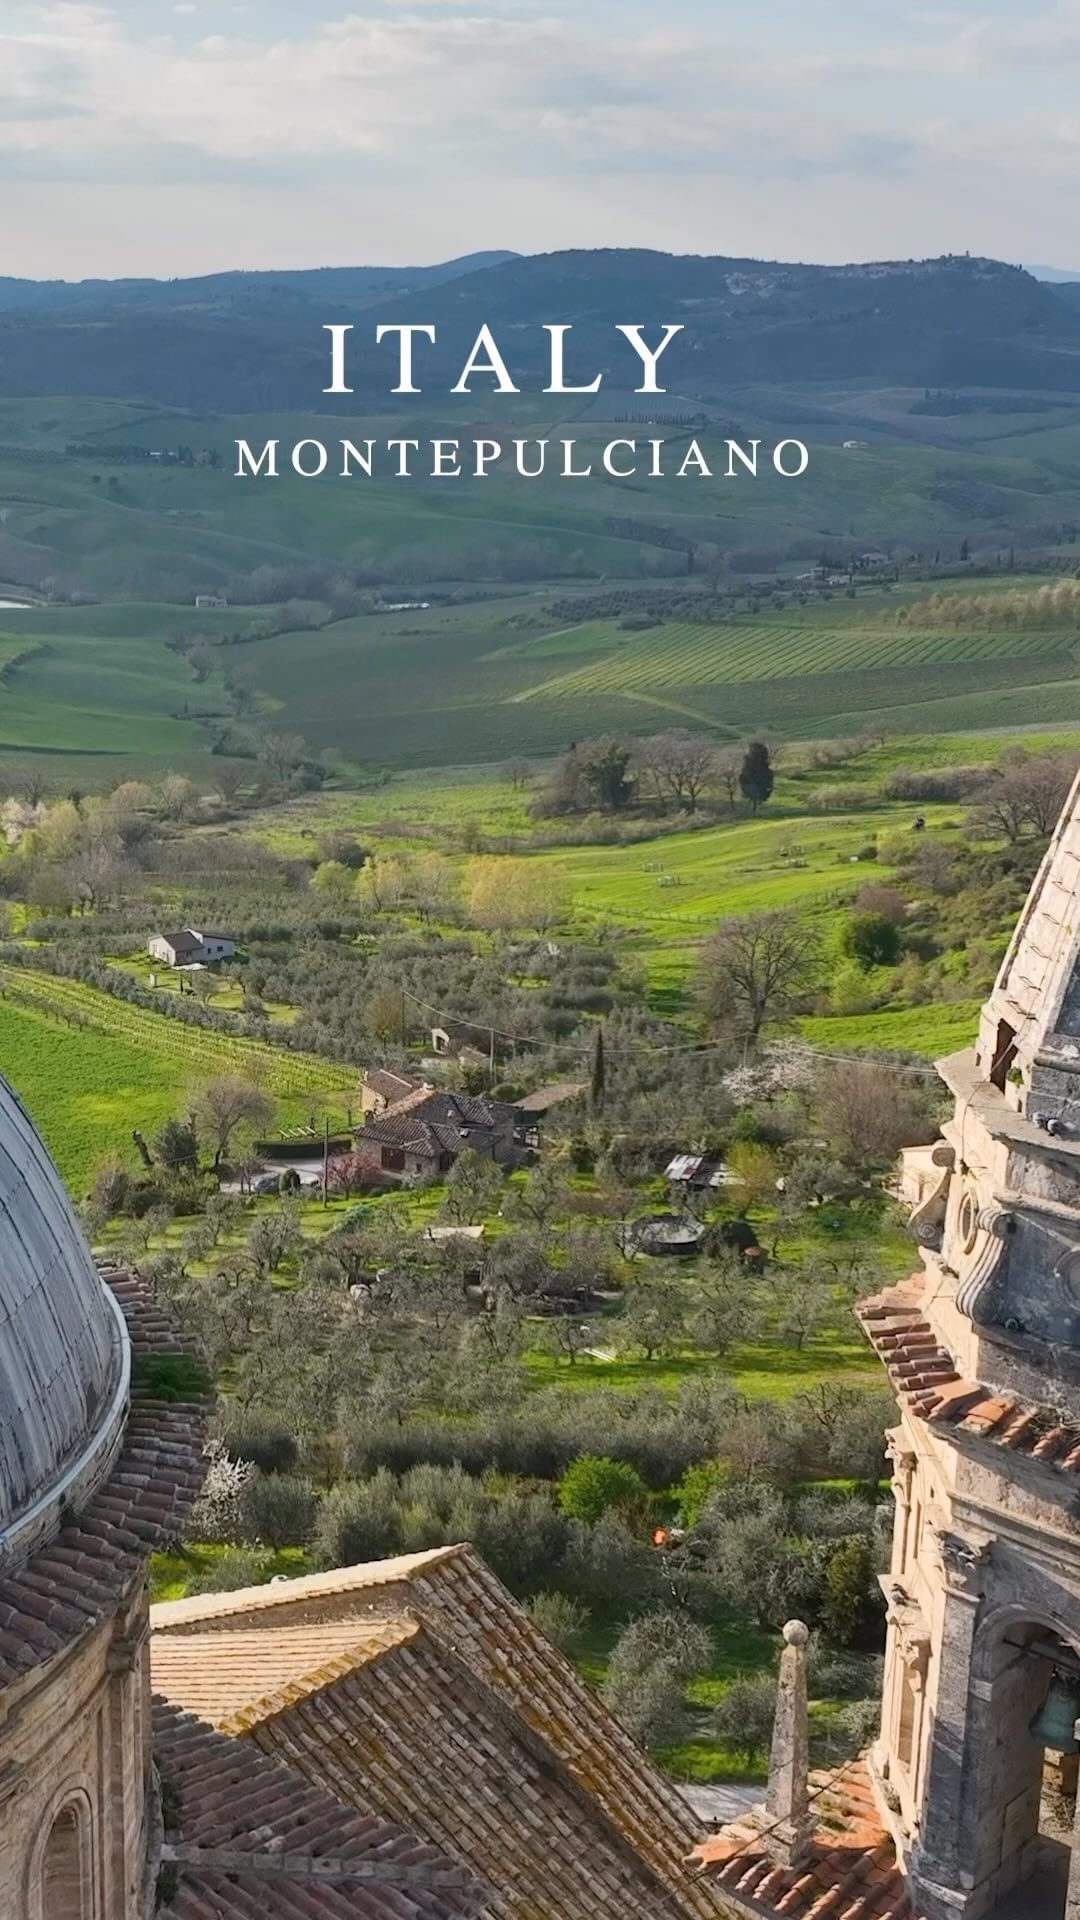 Tuscan Wine and Culinary Delights in Montepulciano